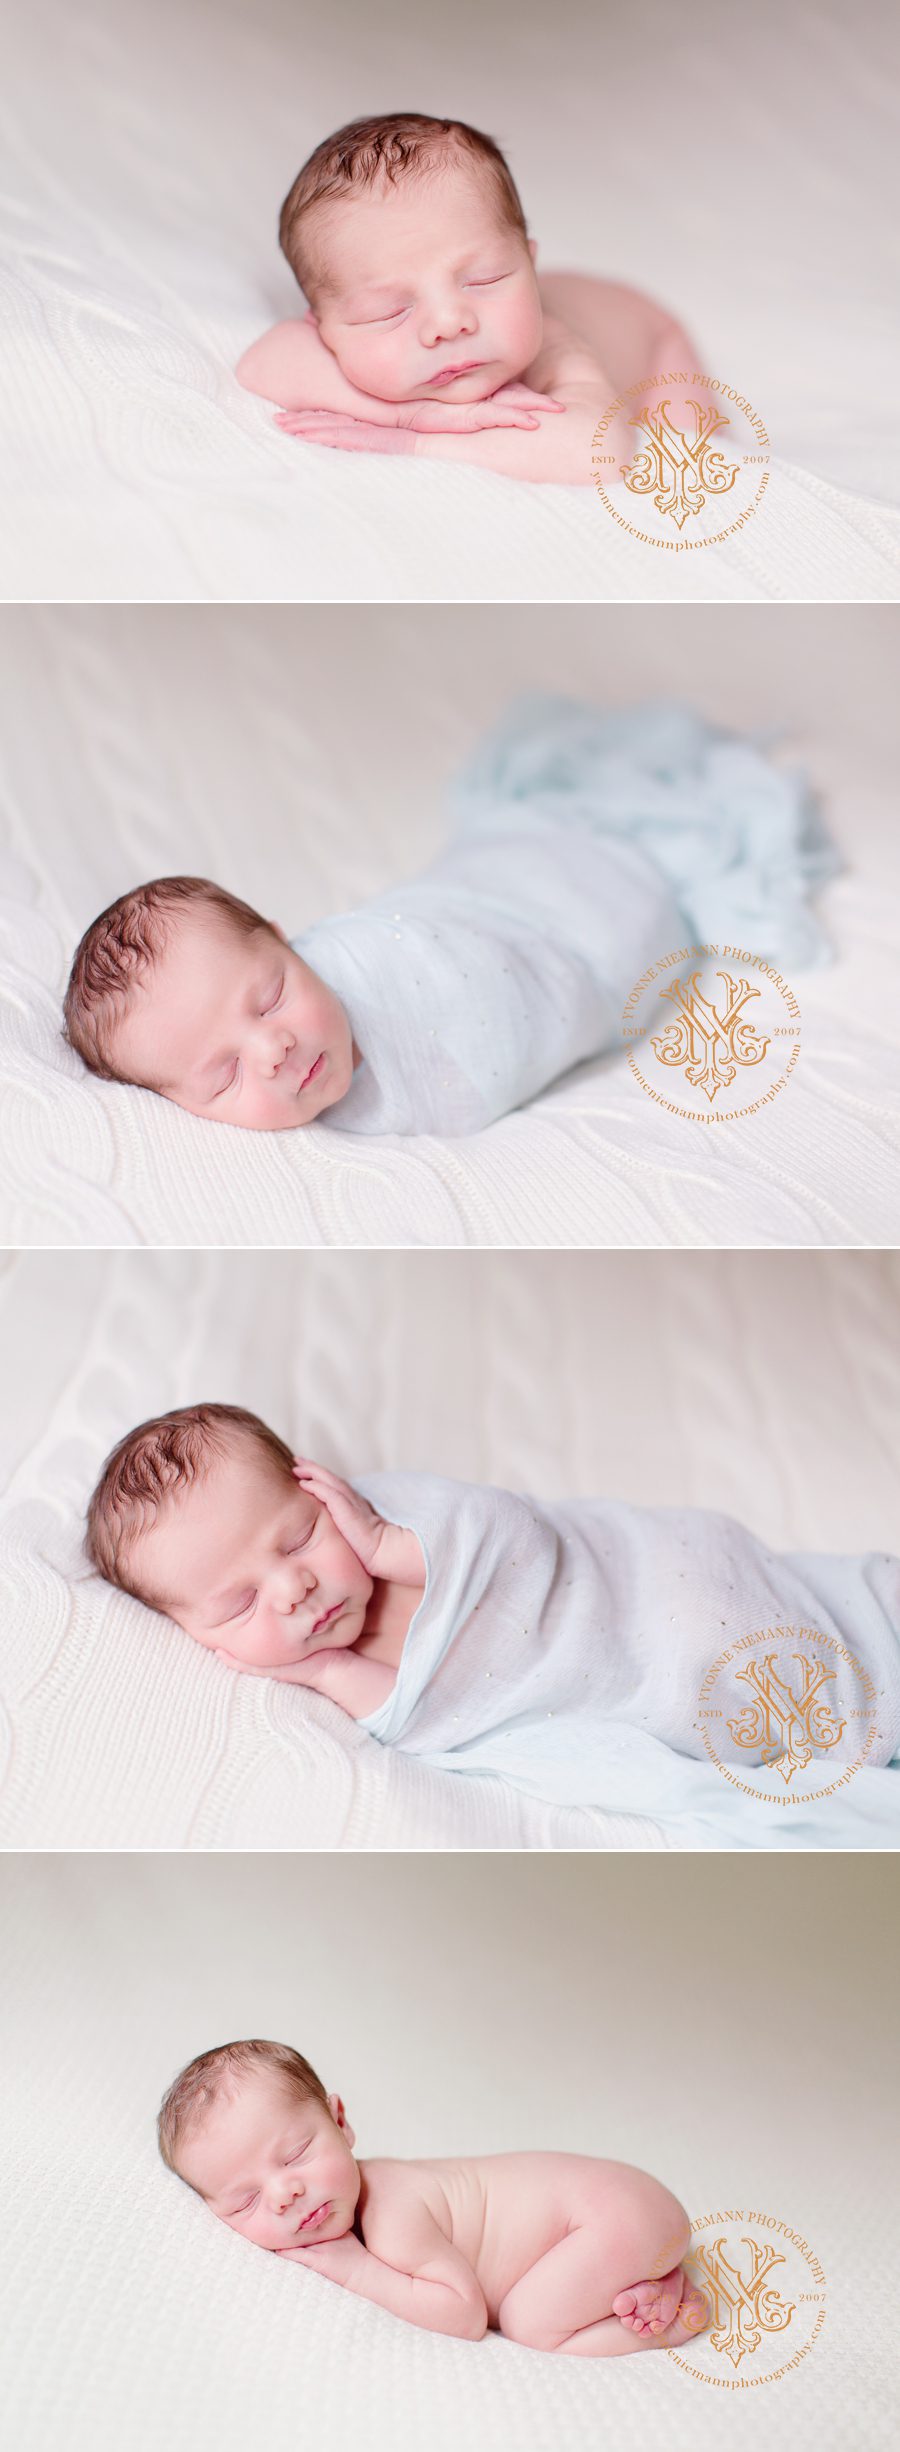 Sweet photos of a one week old infant boy.